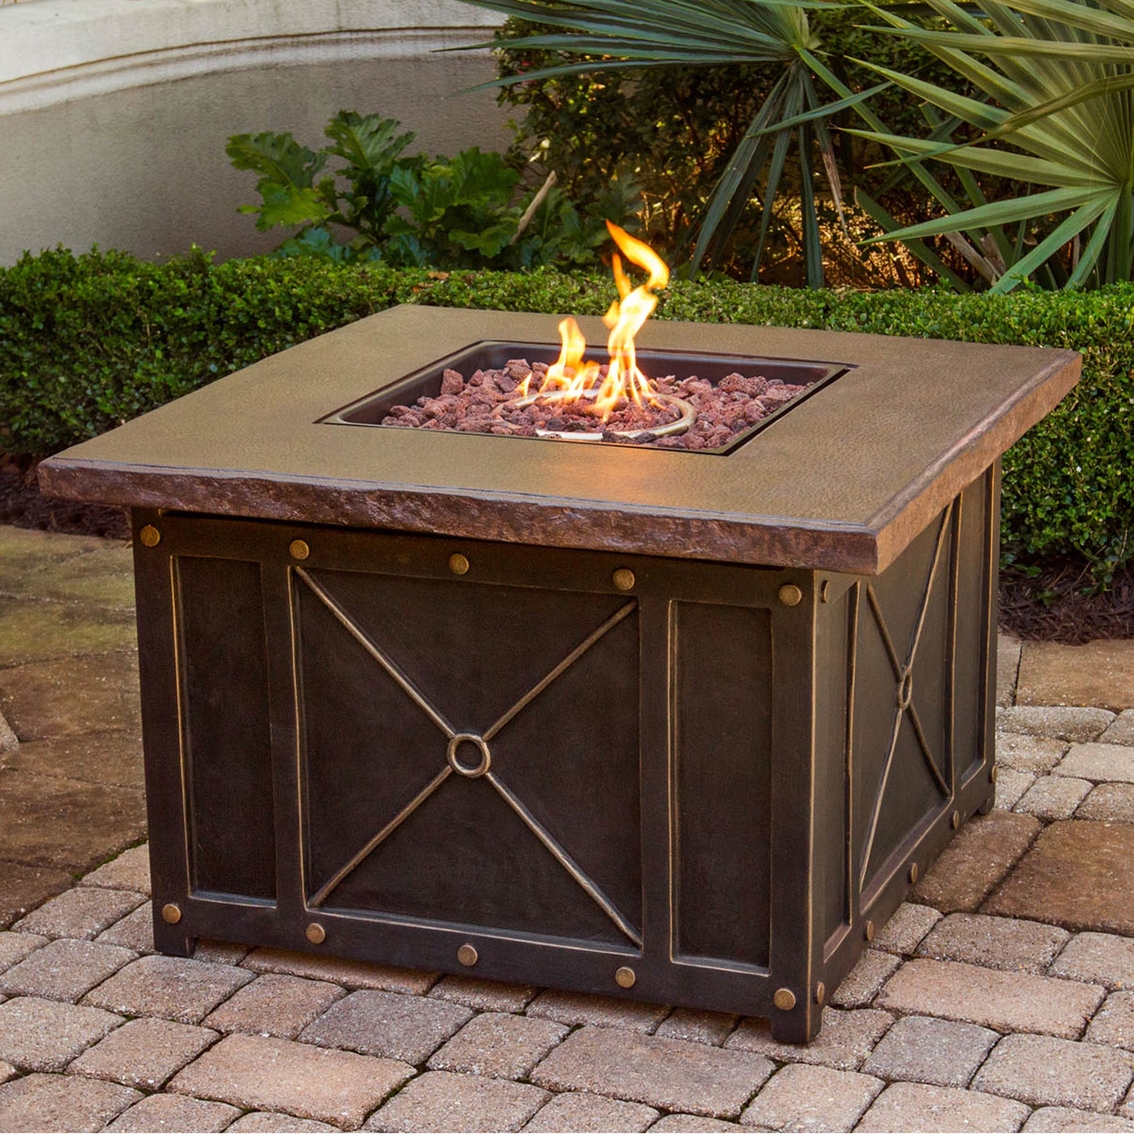 Hanover Traditions 2 pc. Outdoor Lounge Set with Durastone Fire Pit - Image 3 of 4